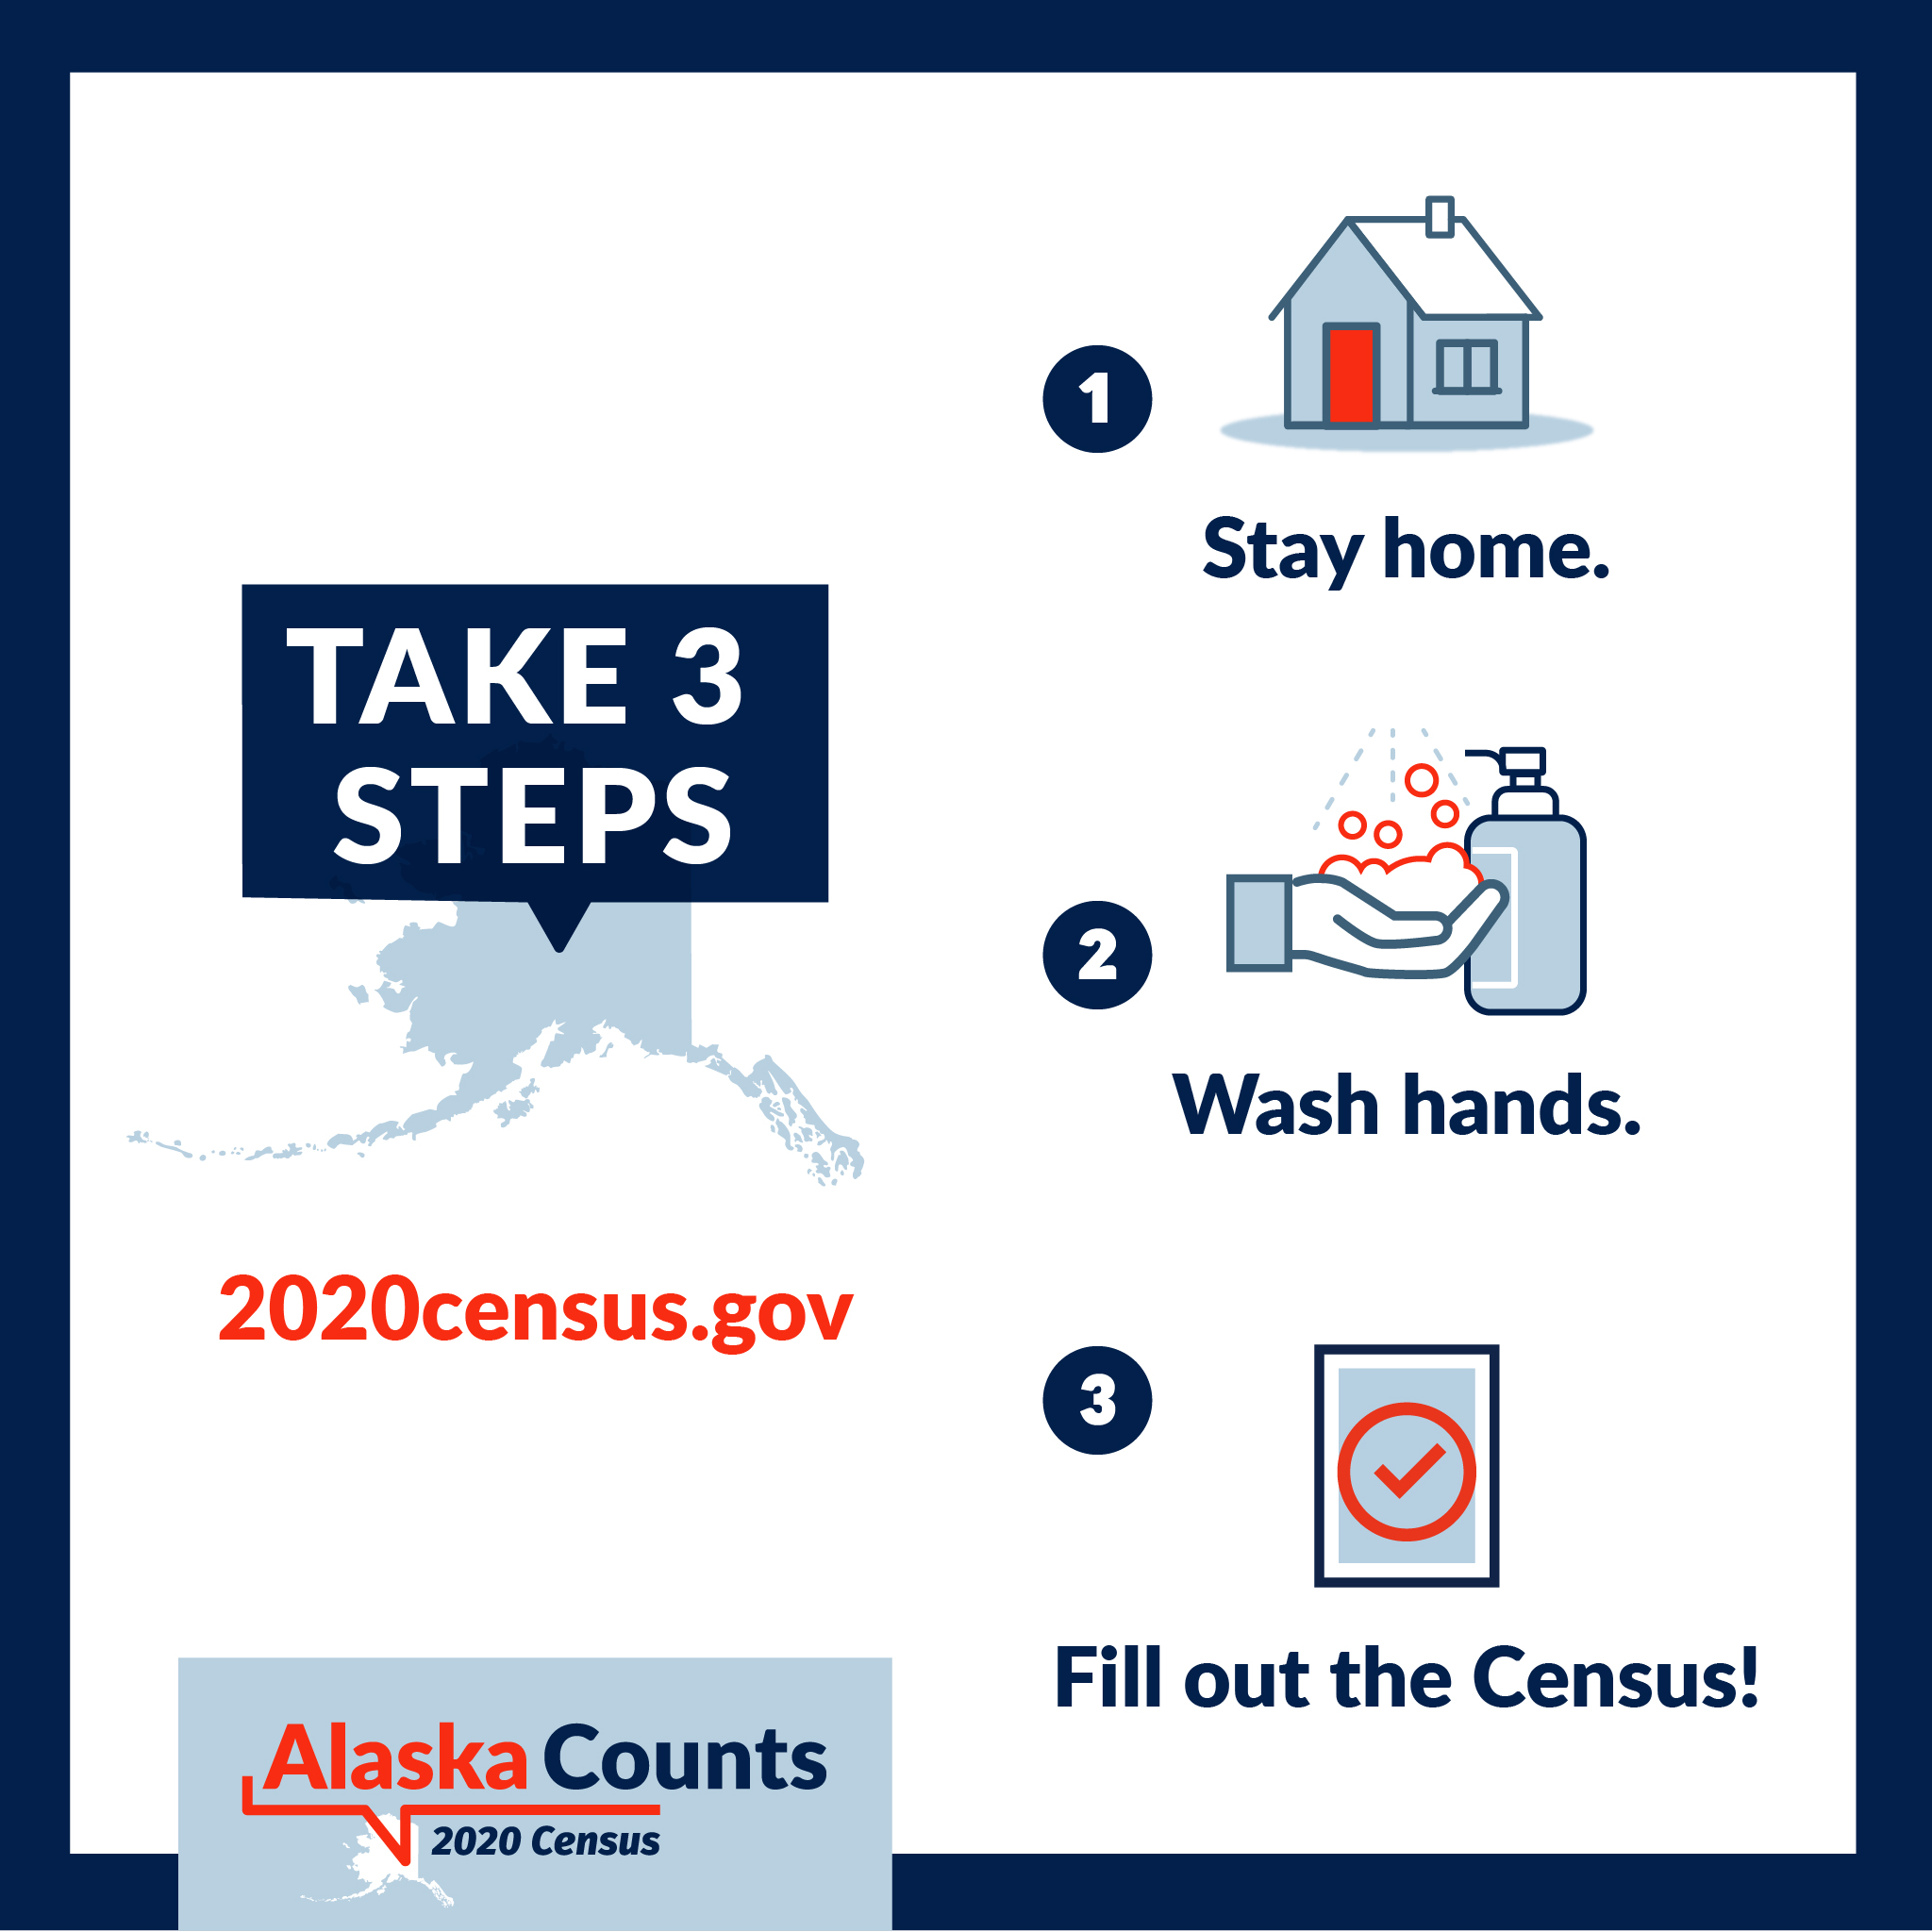 Stay home, wash your hands, and fill out the Census!